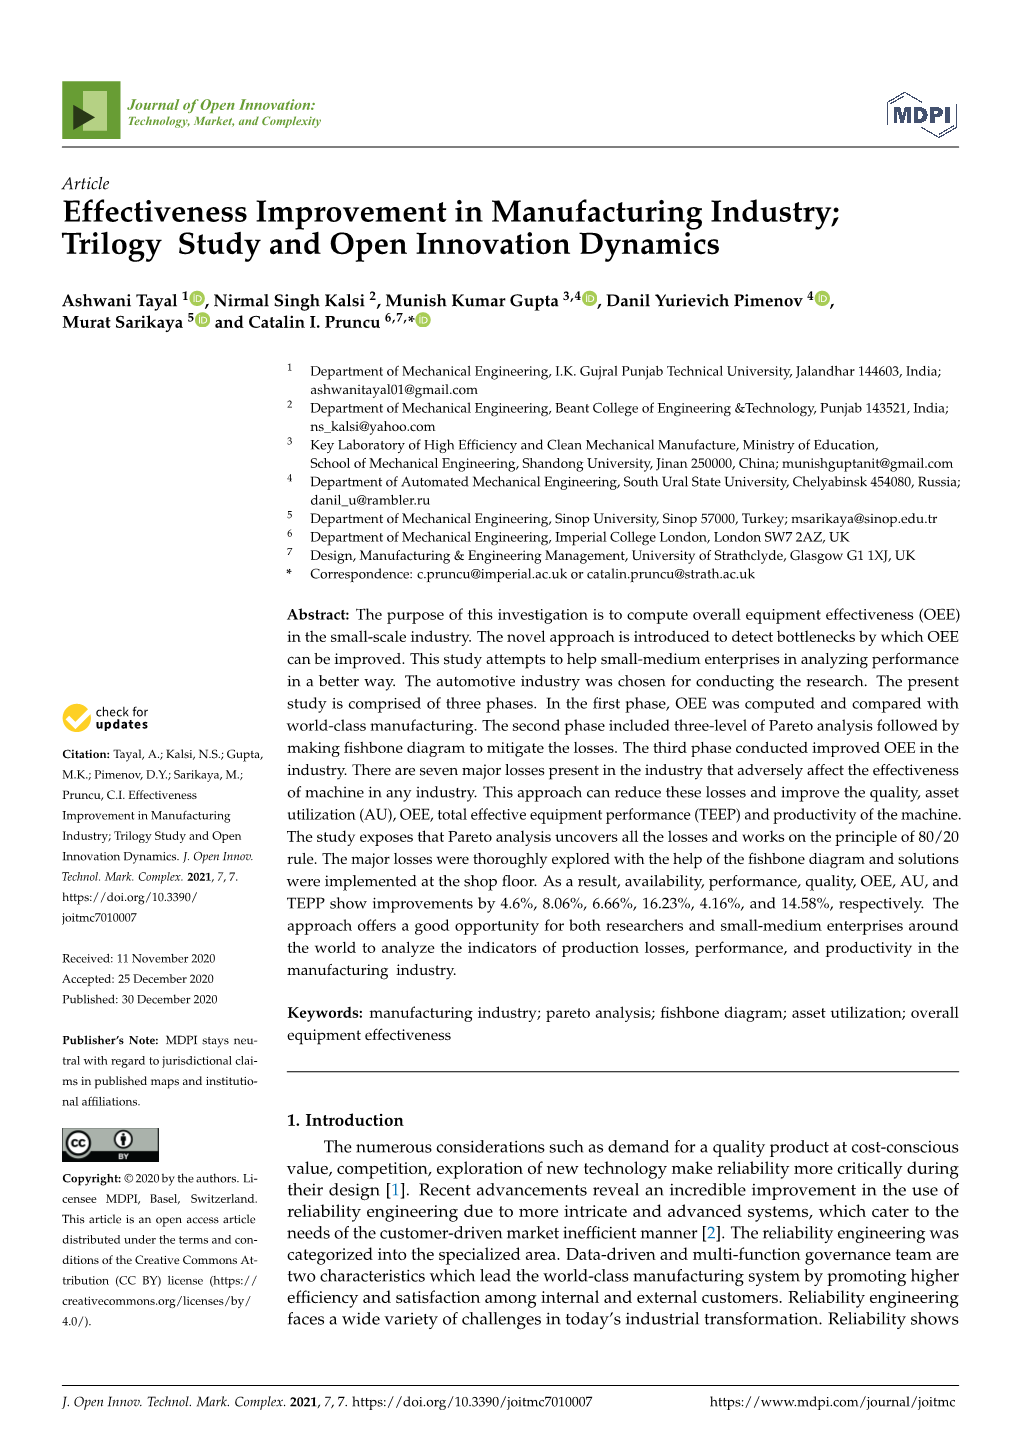 Effectiveness Improvement in Manufacturing Industry; Trilogy Study and Open Innovation Dynamics